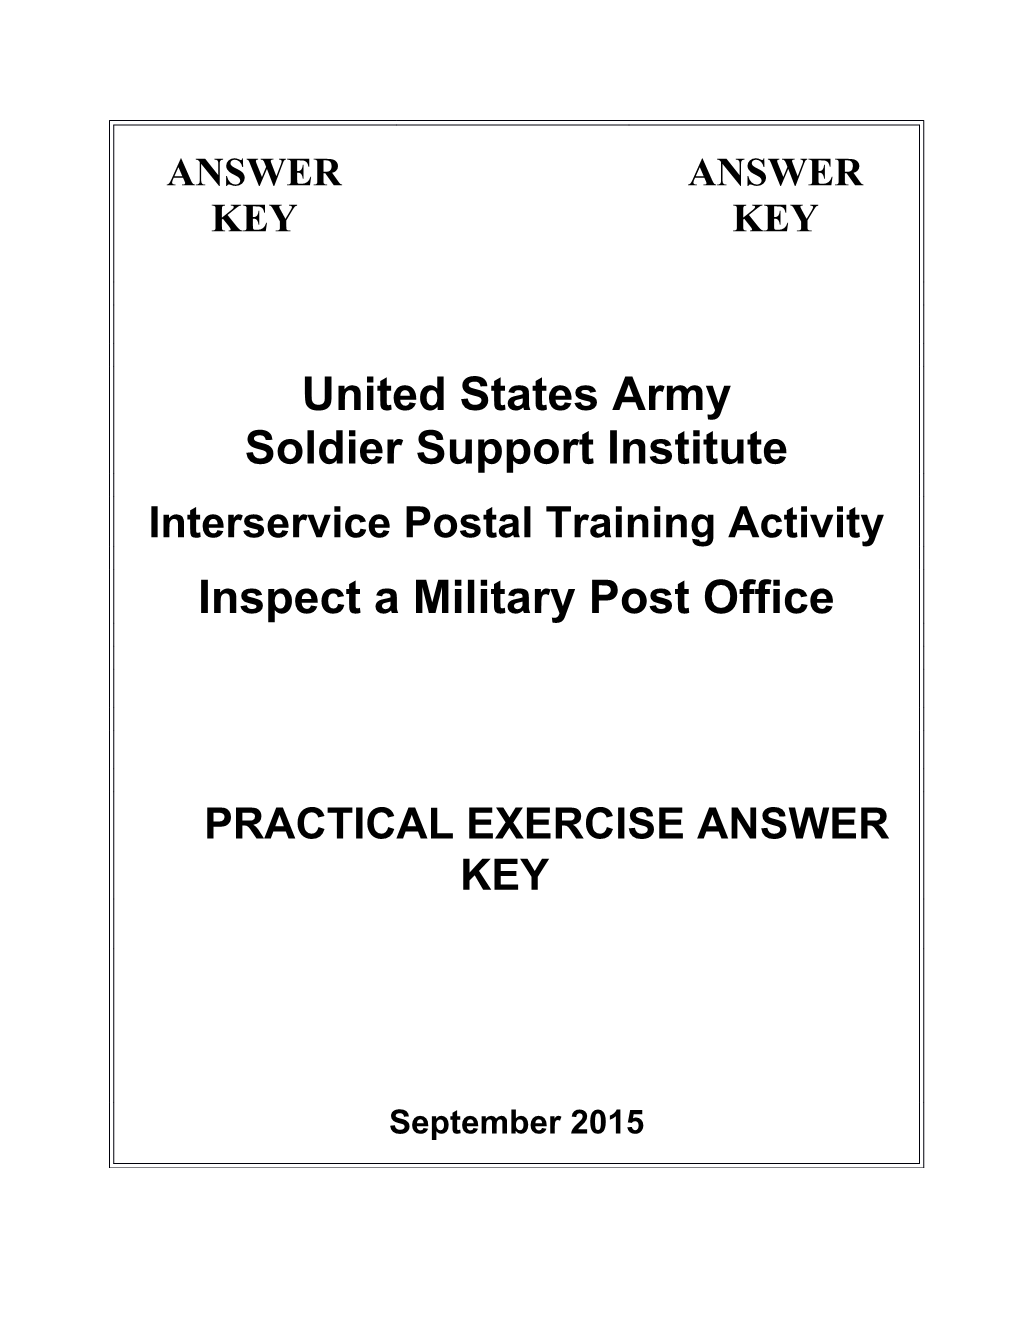 Inspect a Military Post Office